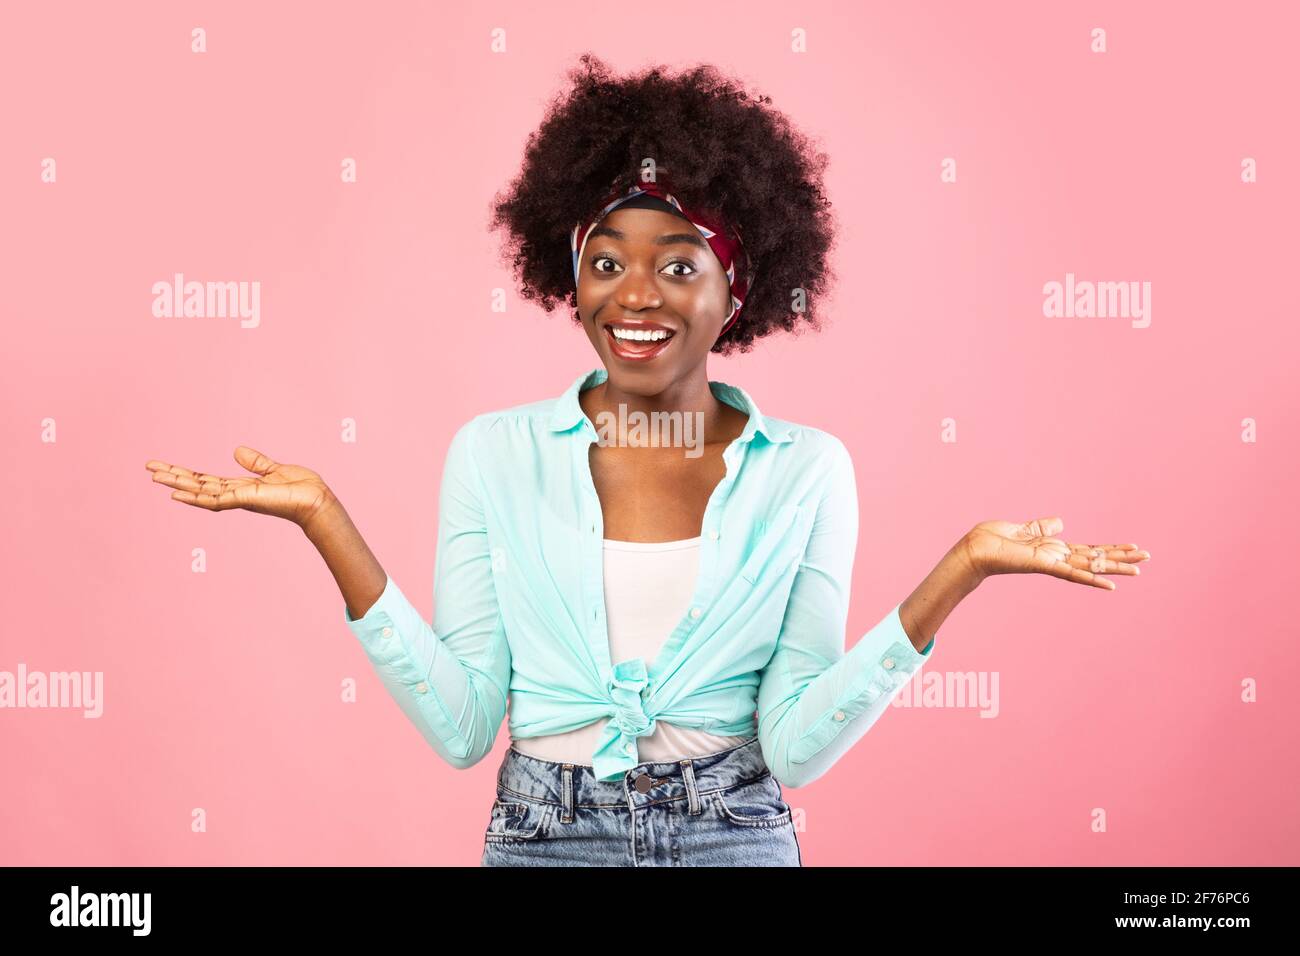 Cheerful Black Woman Shrugging Shoulders Smiling To Camera, Pink Background Stock Photo